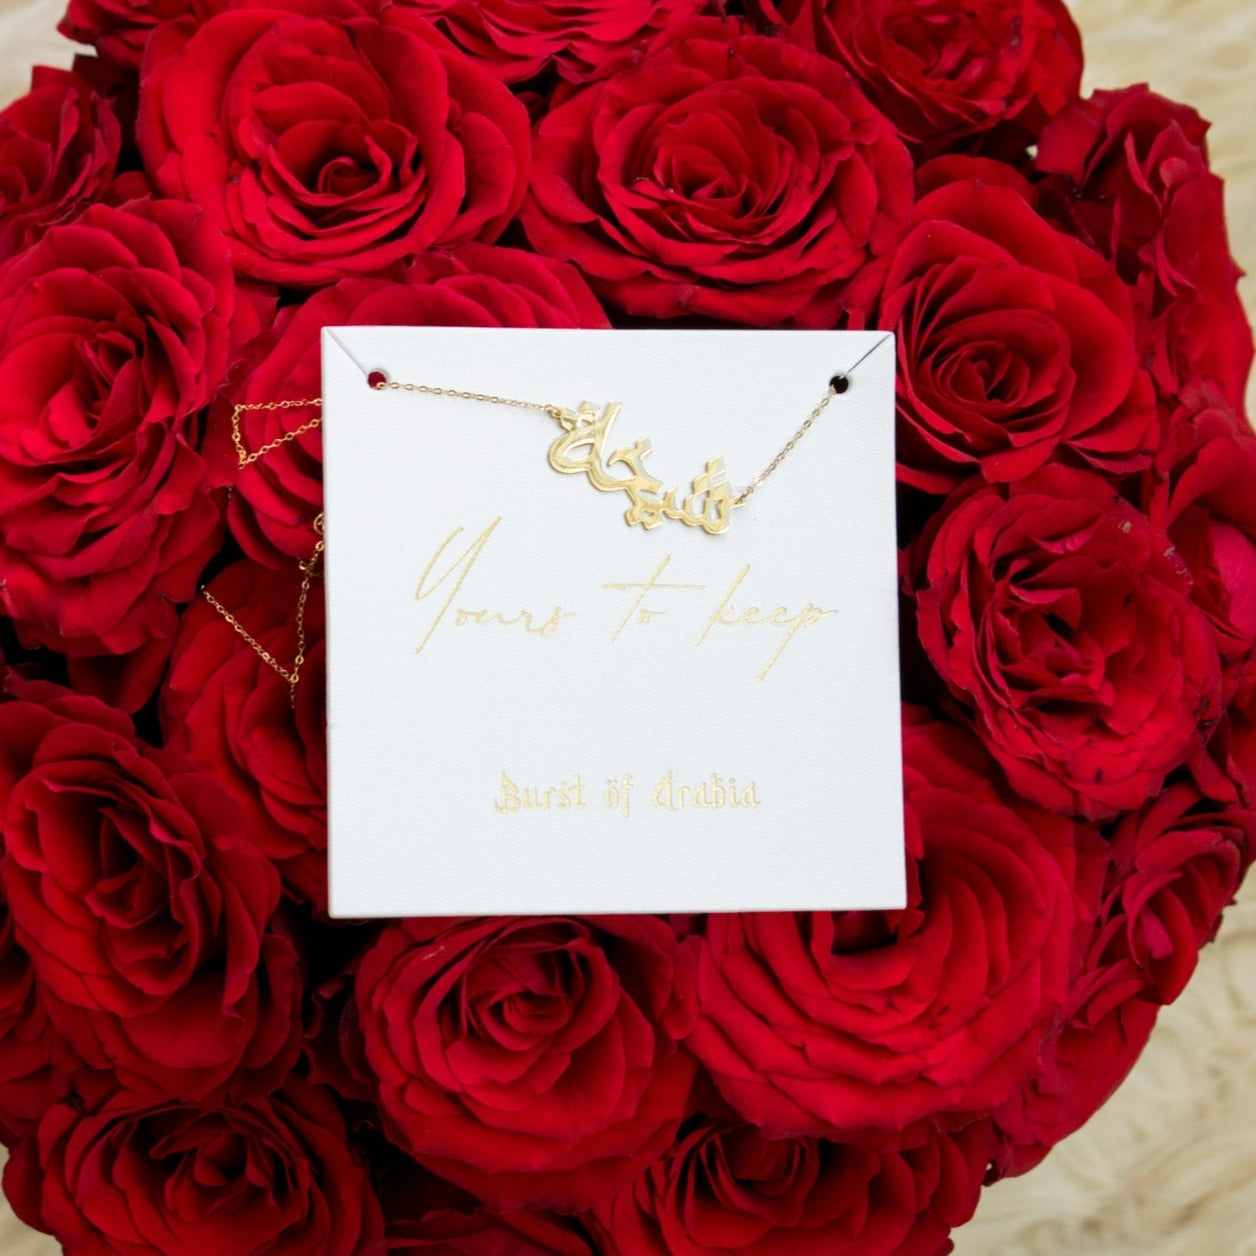 Celebrate Love and Milestones Make her birthday unforgettable with a gift that she will cherish forever. Designed and handcrafted in Dubai. Quick delivery across Dubai, Abu Dhabi, UAE.